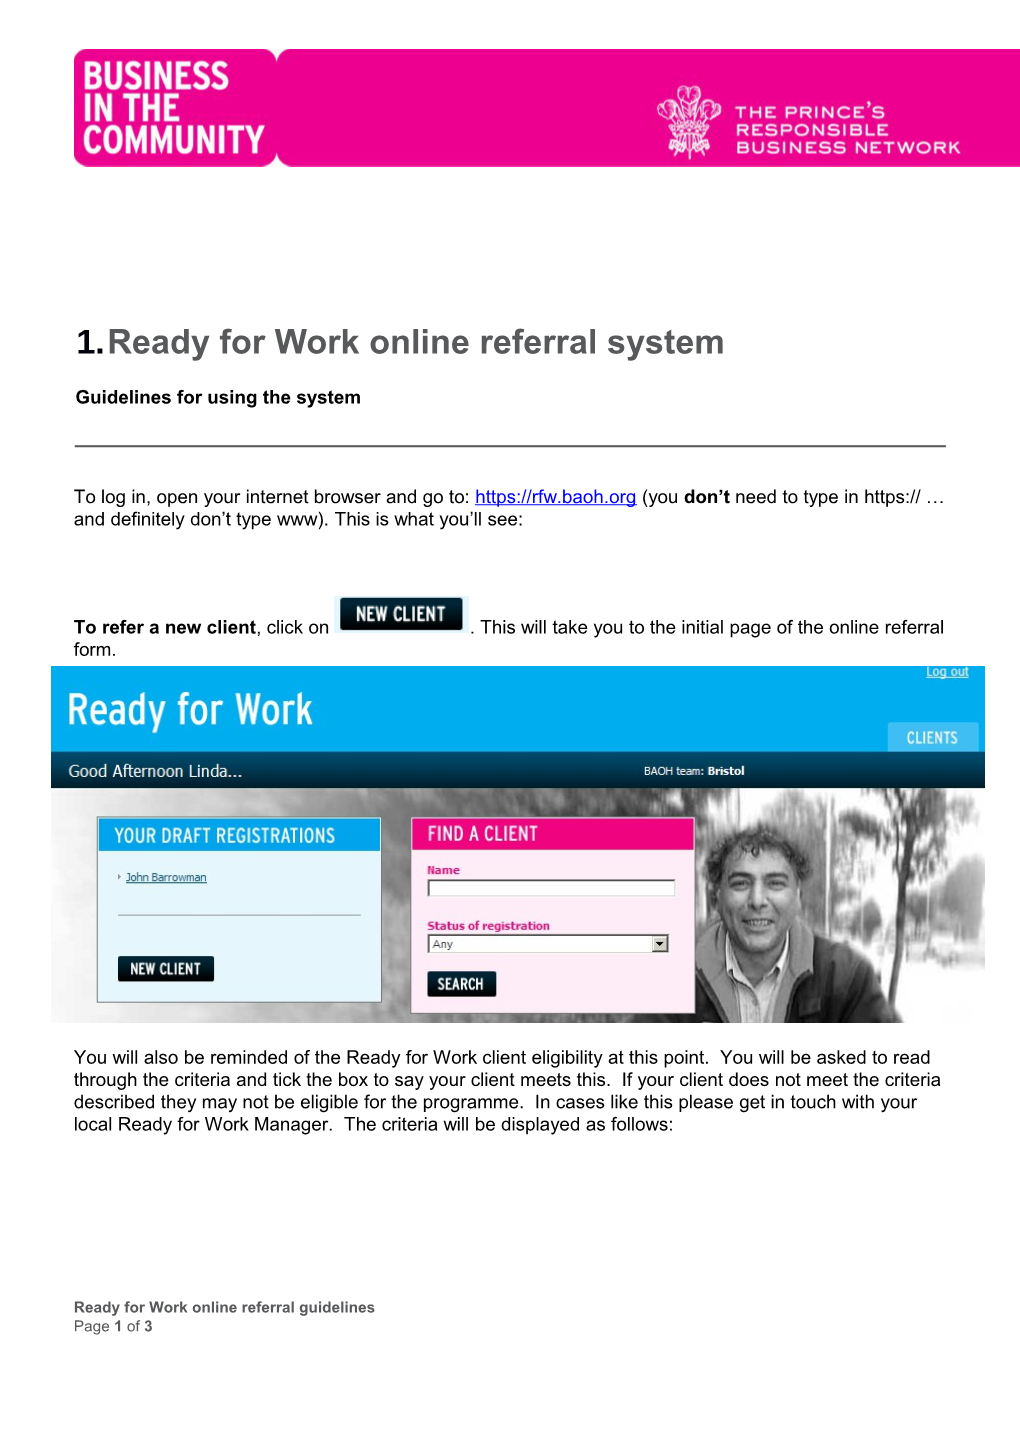 Ready for Work Online Referral System